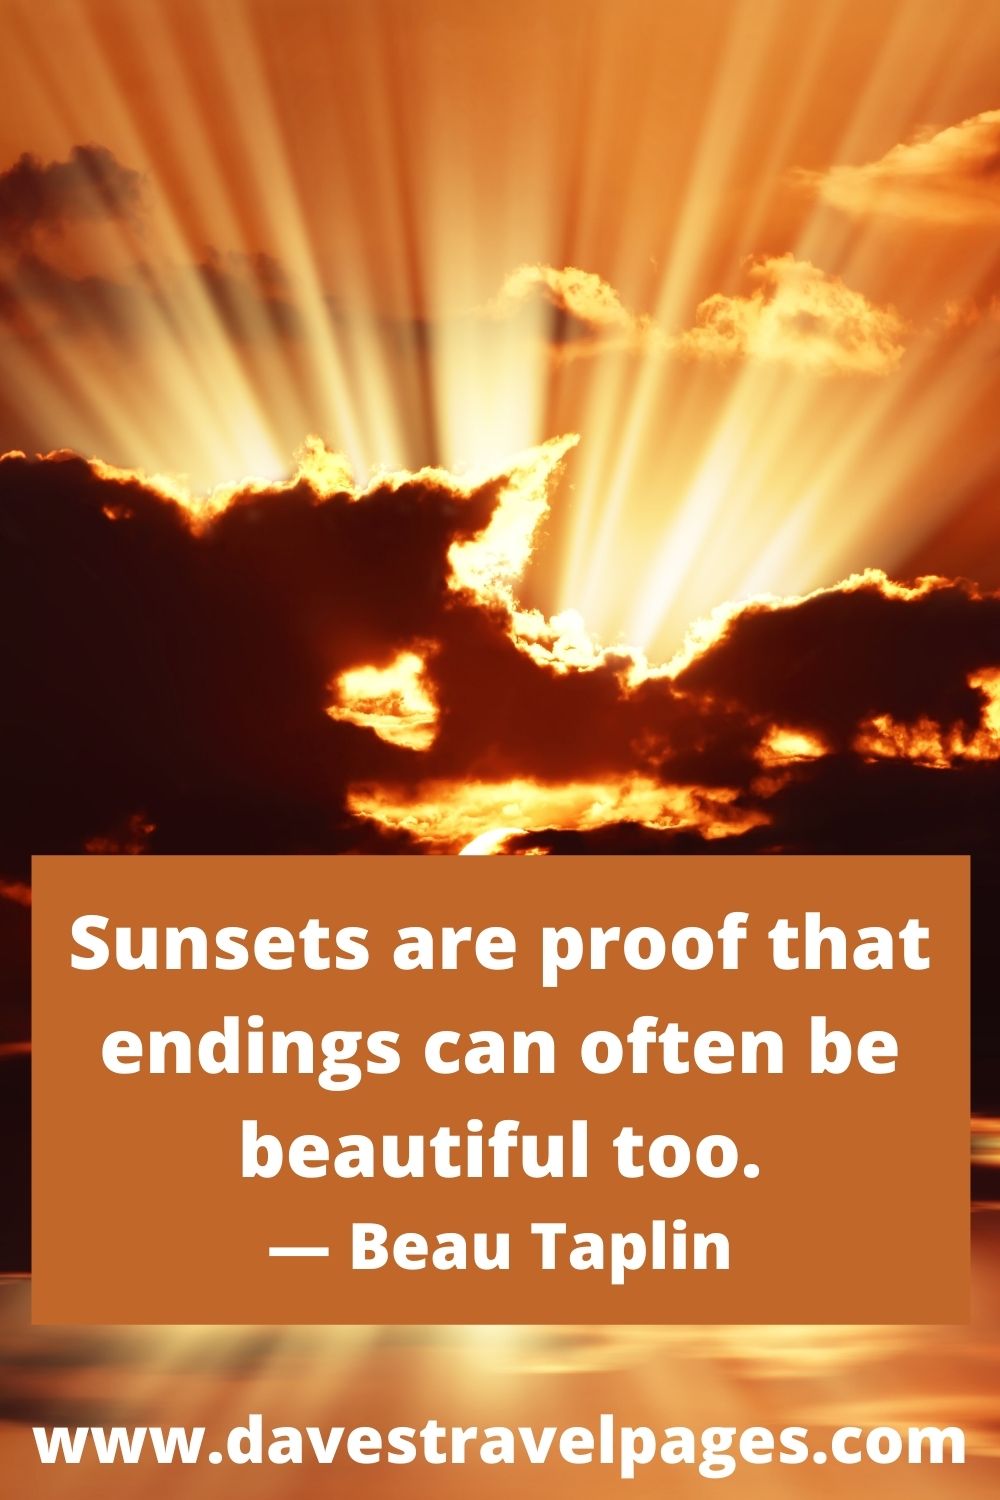 Sunsets are proof that endings can often be beautiful too. — Beau Taplin